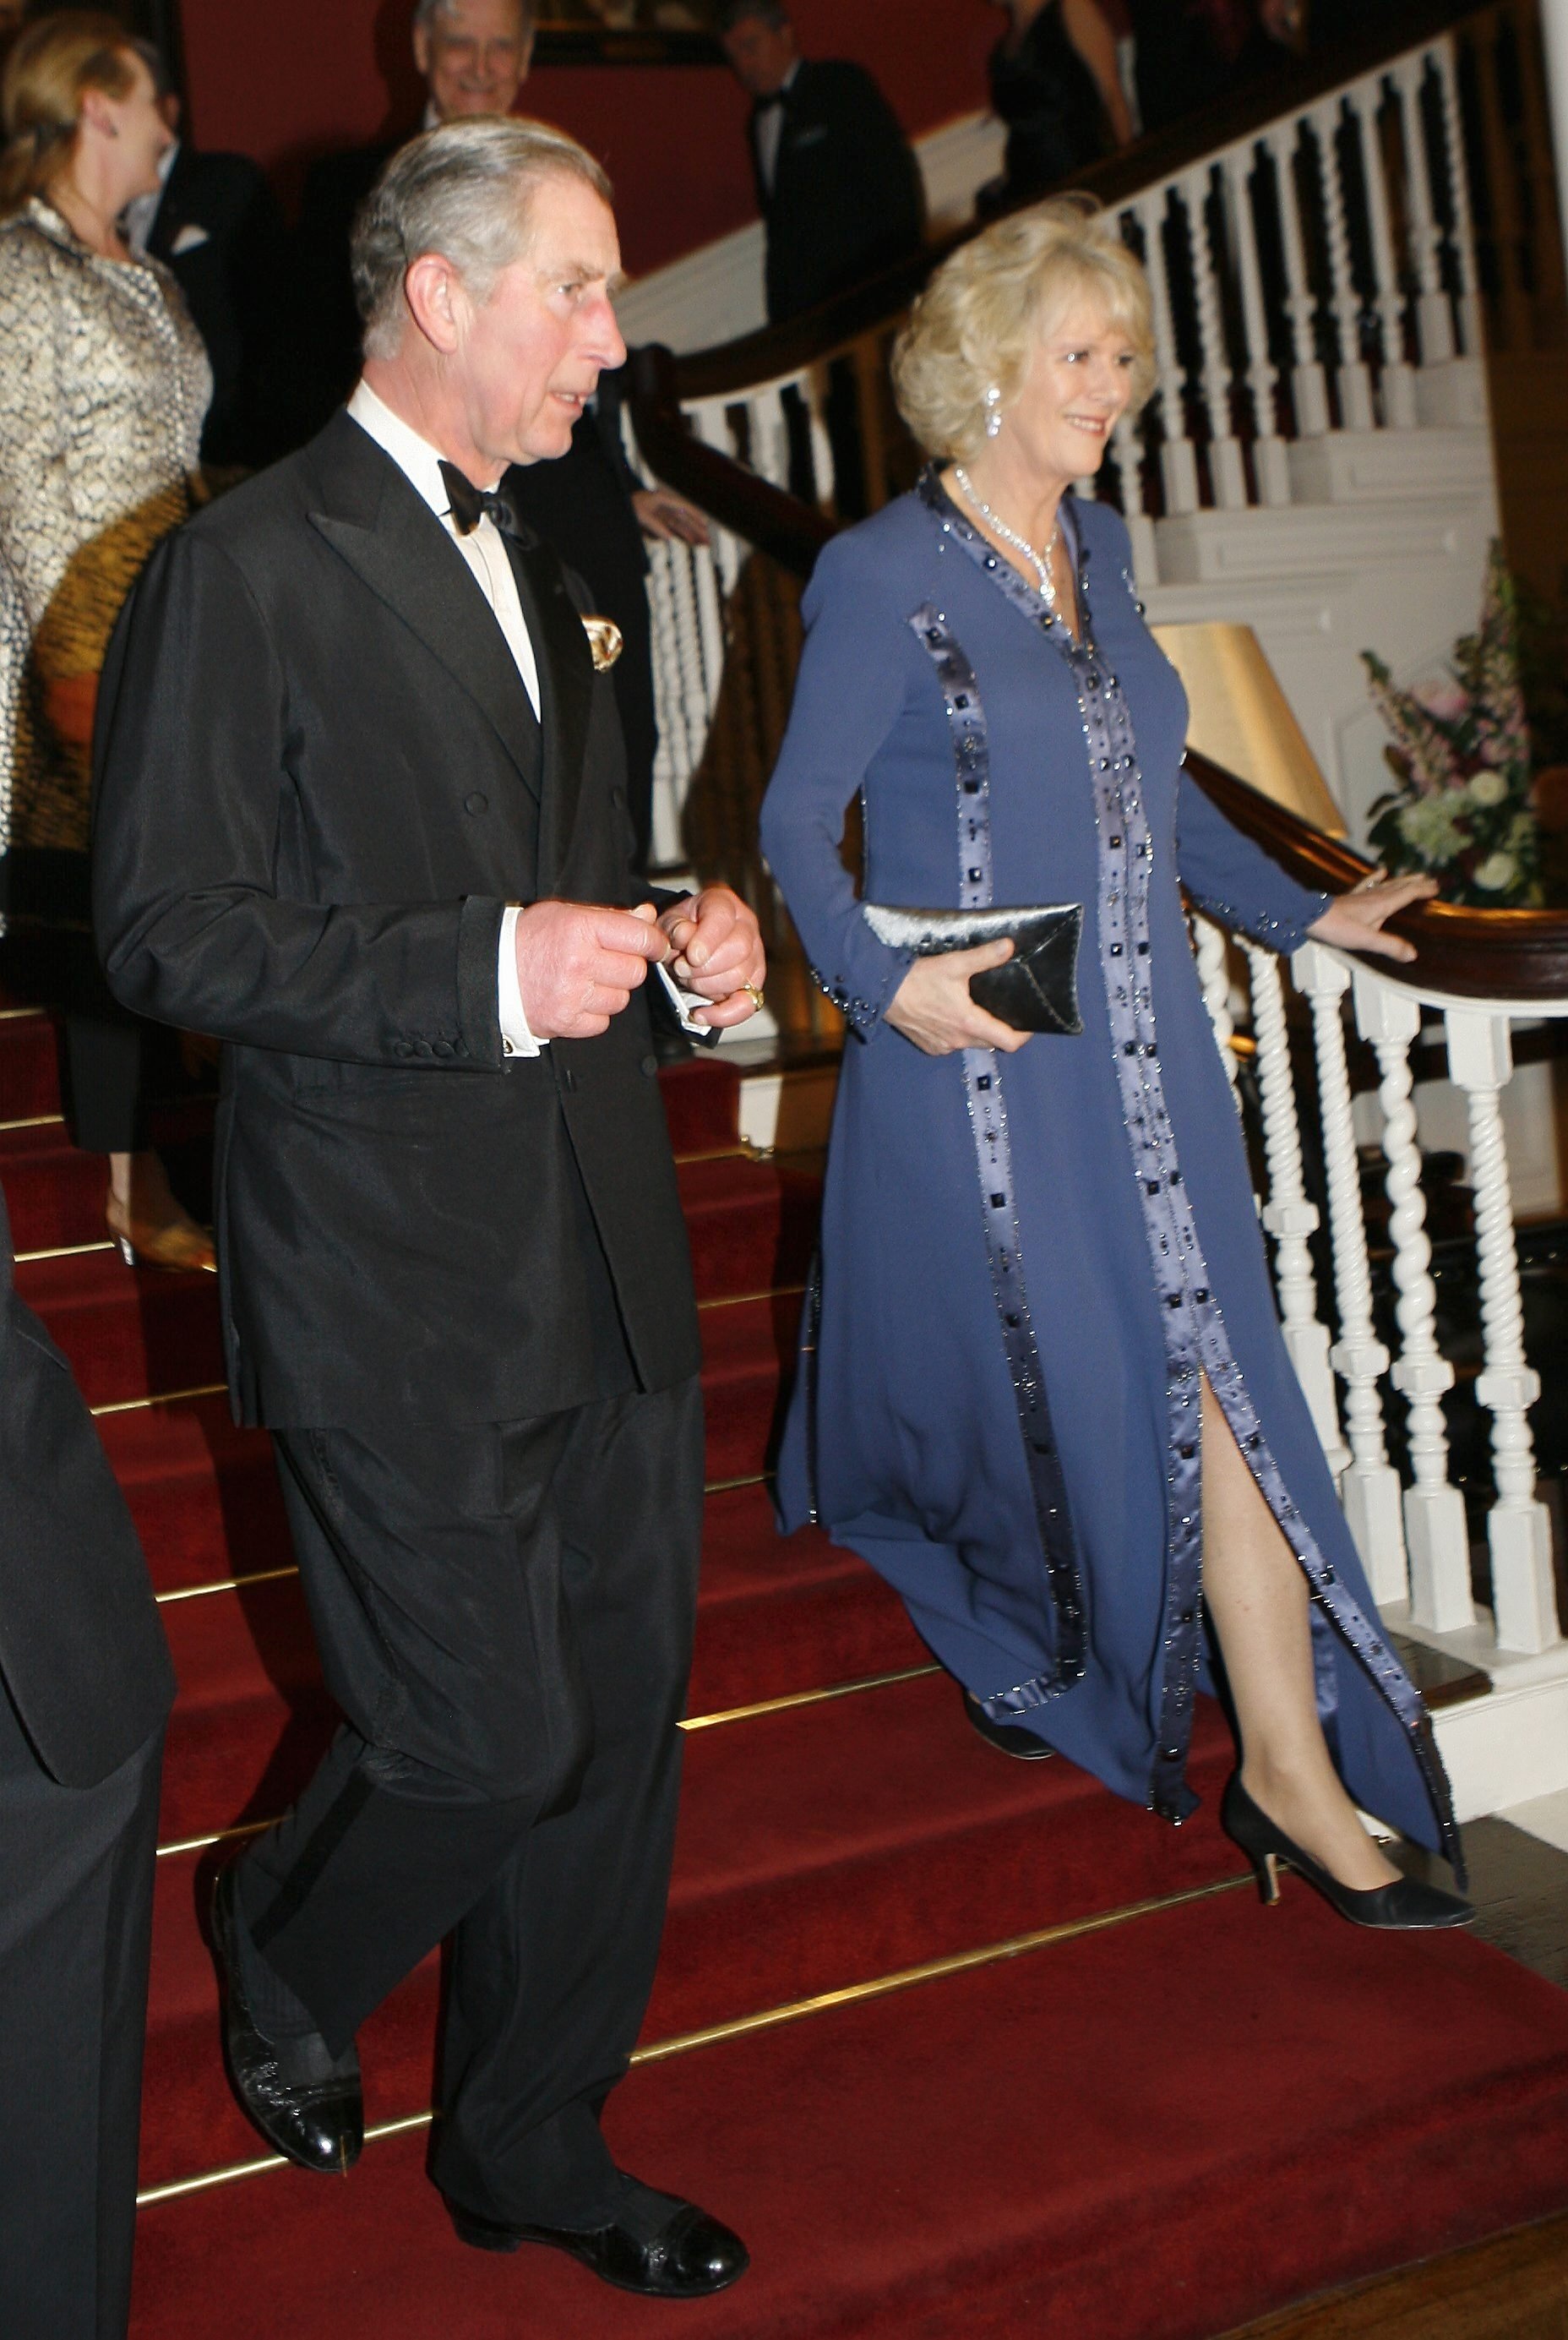 Prince Charles and Camilla Parker Bowles wallking down stairs at a Global Enviornmental Citizen Award dinner in New York 